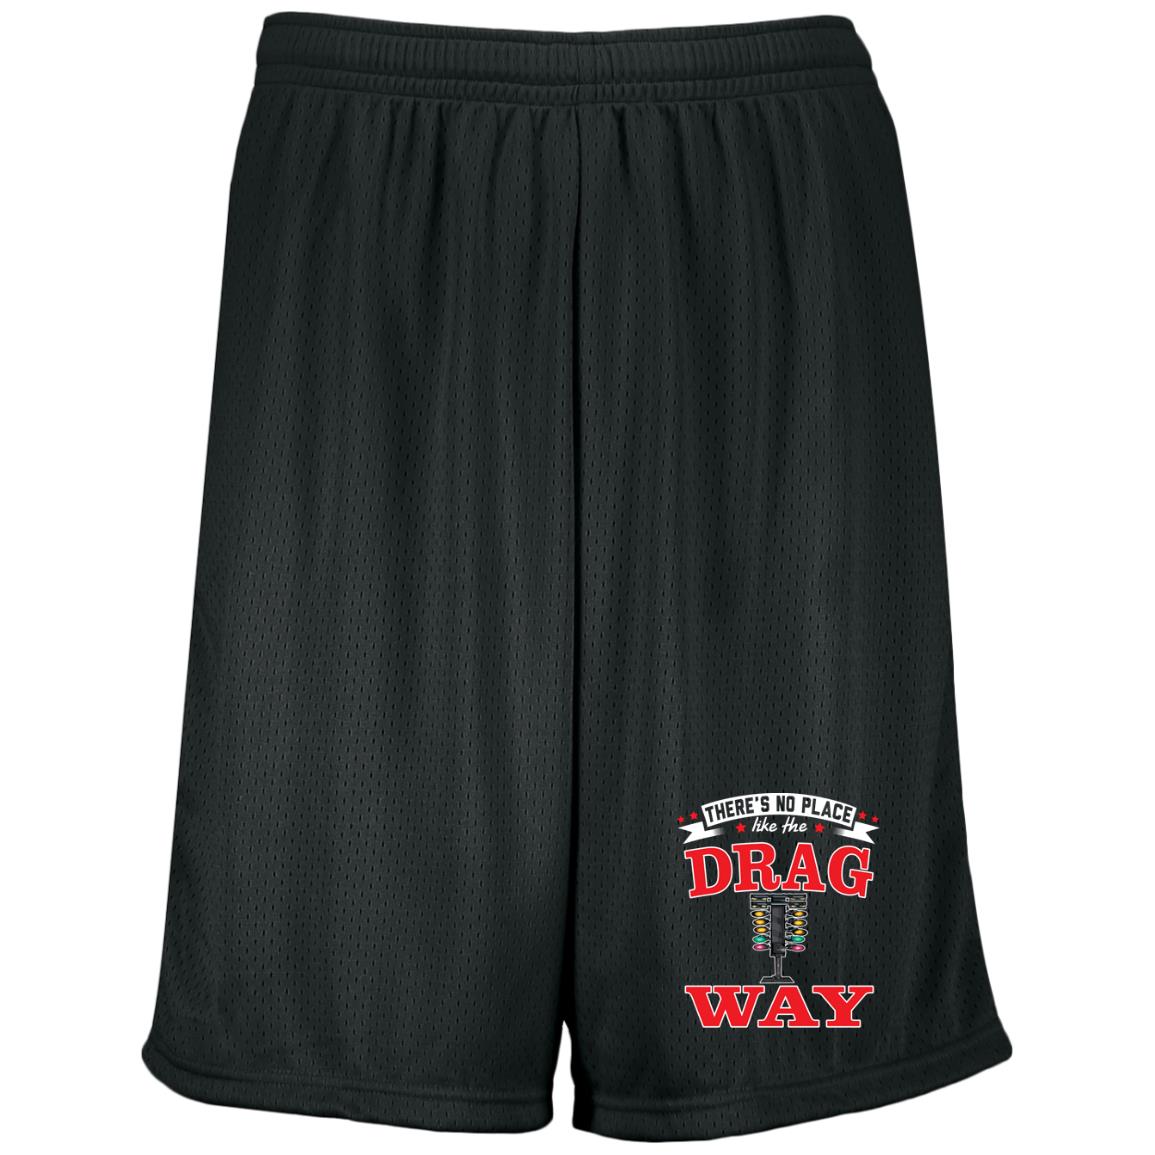 There's No Place Like The Dragway Moisture-Wicking 9 inch Inseam Mesh Shorts